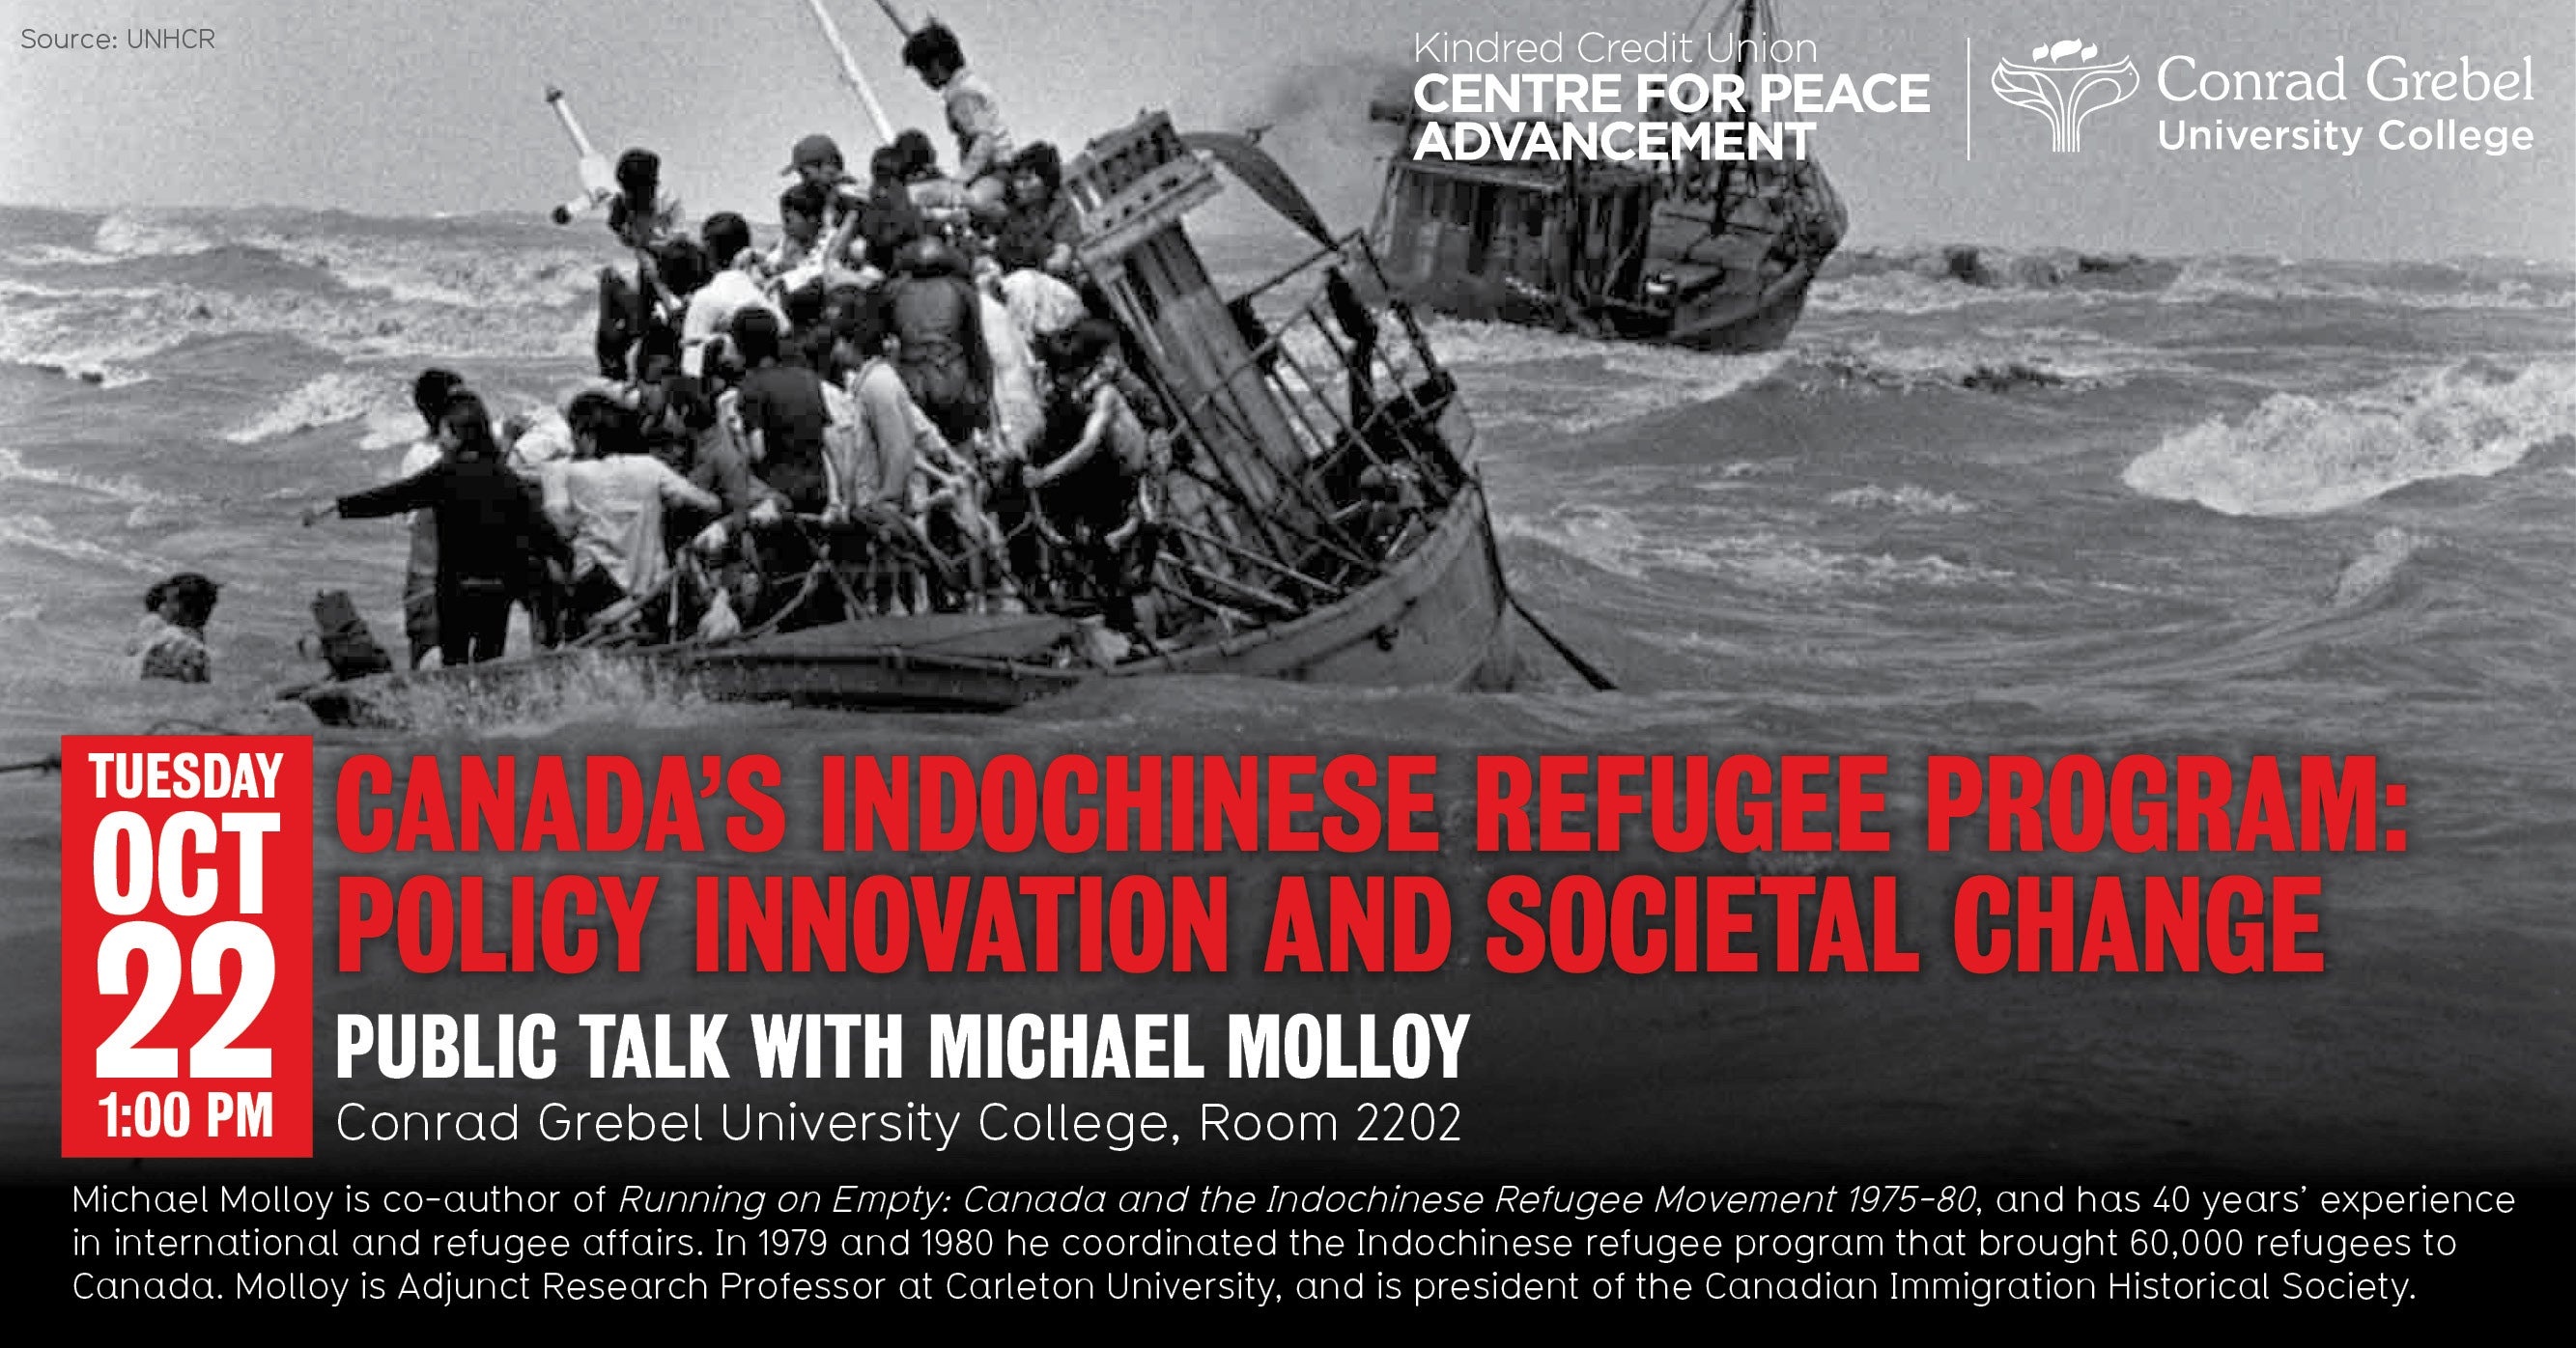 Poster for Michael Molloy lecture with picture of refugees on a boat